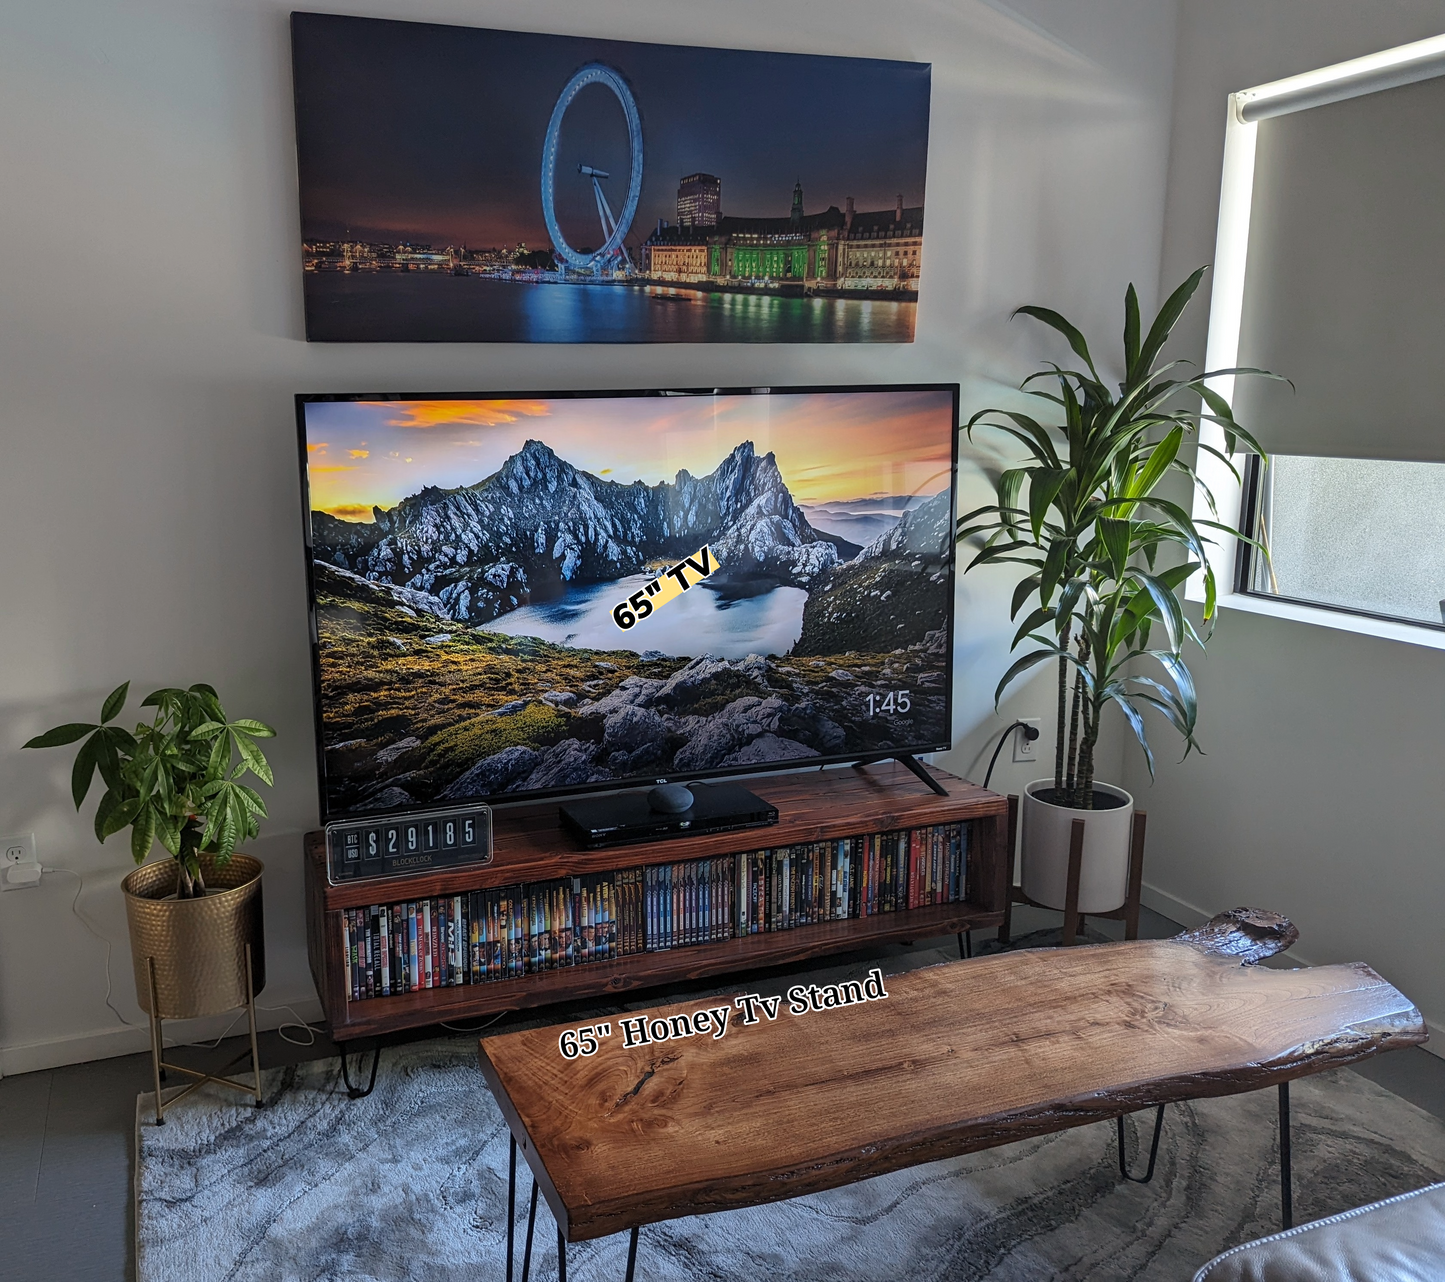 The TV Stand